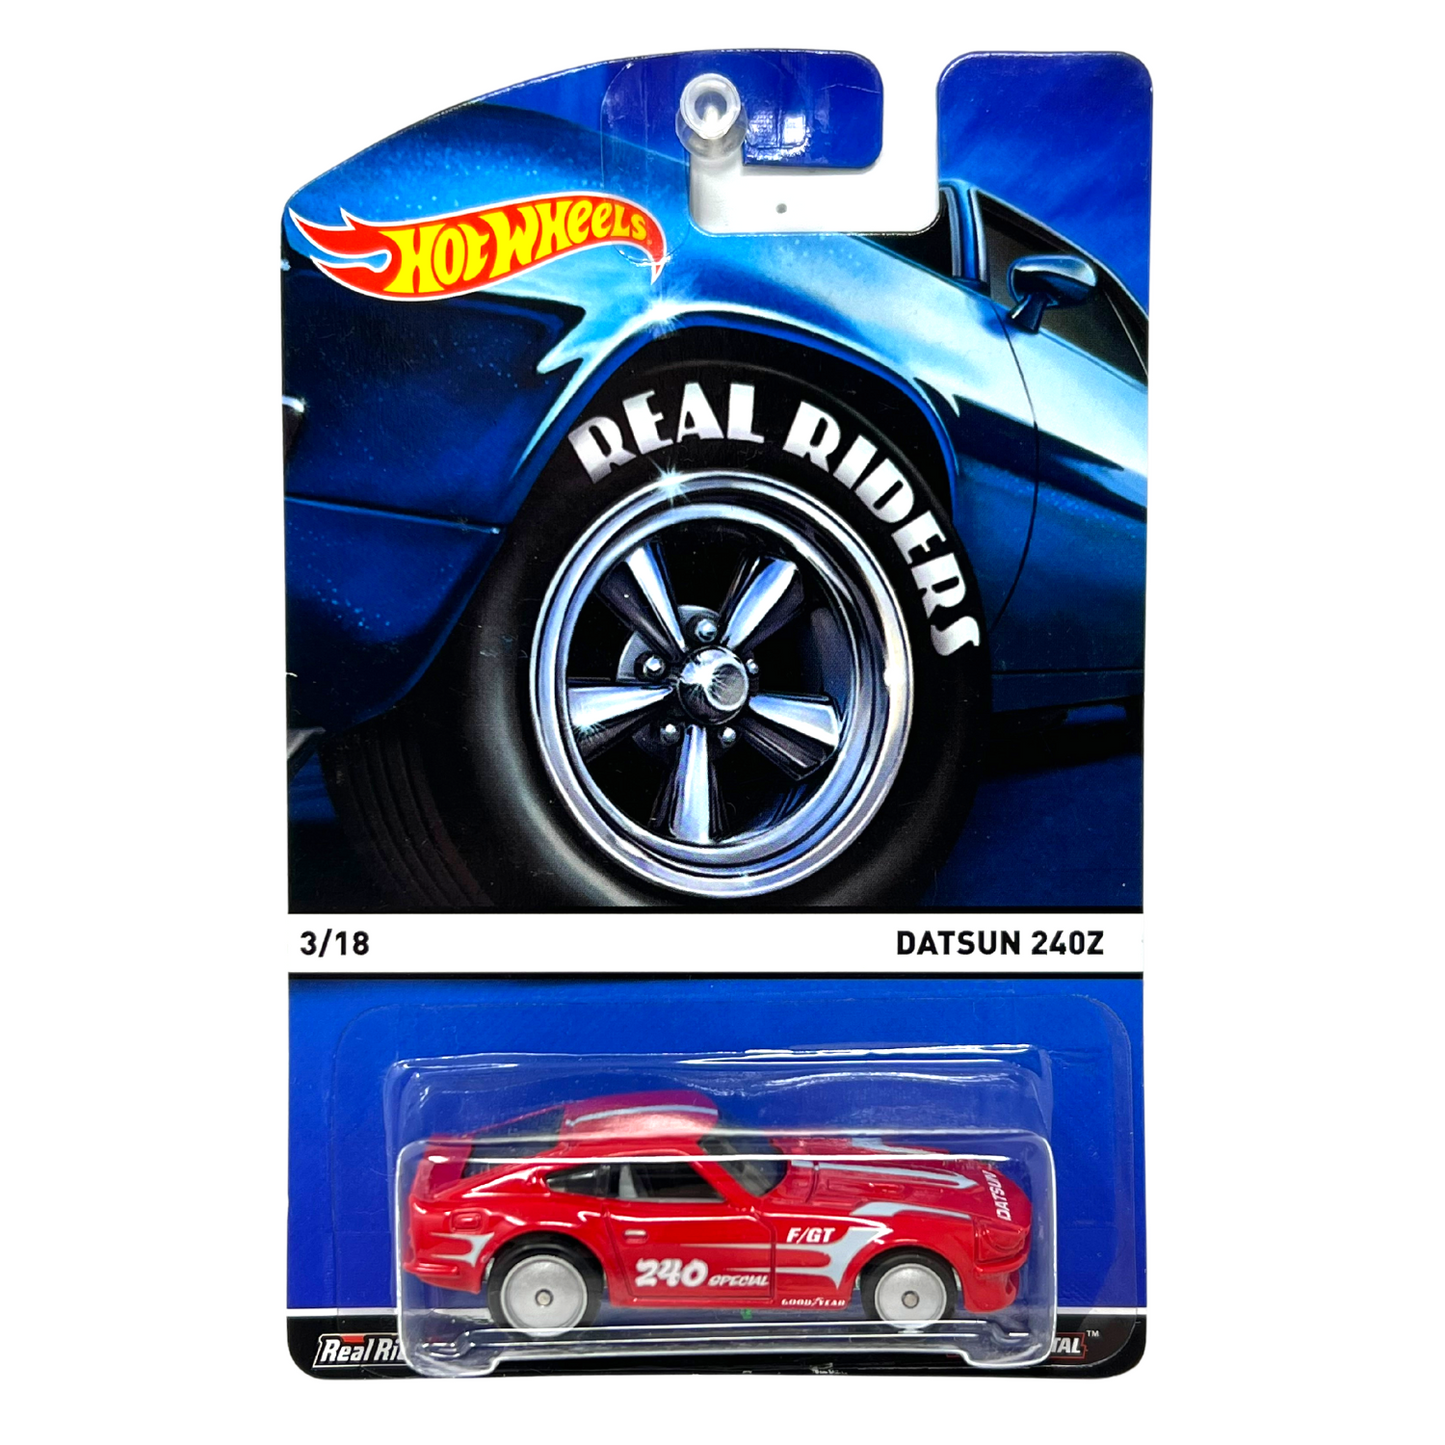 Hot Wheels Heritage Real Riders Datsun 240Z 1:64 Diecast